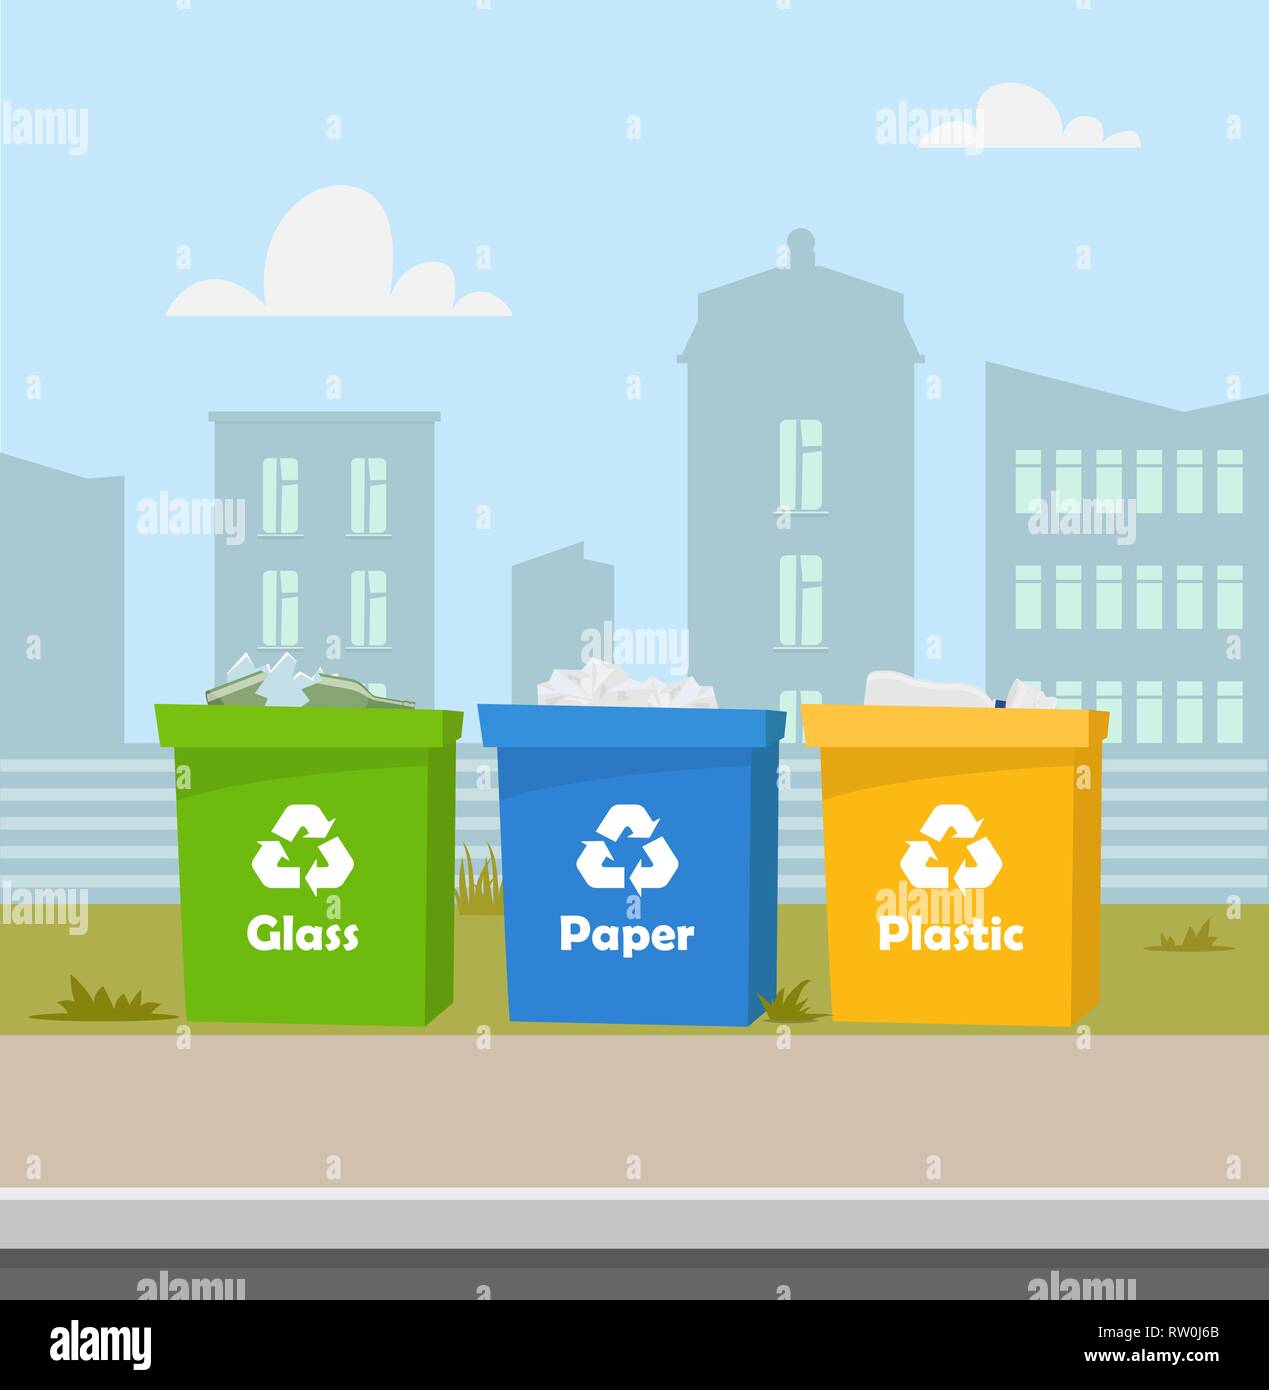 Containers with waste. Recycling and sorting garbage. City landscape on background. Blue, green, yellow trash bins with recycling symbols. Containers  Stock Vector